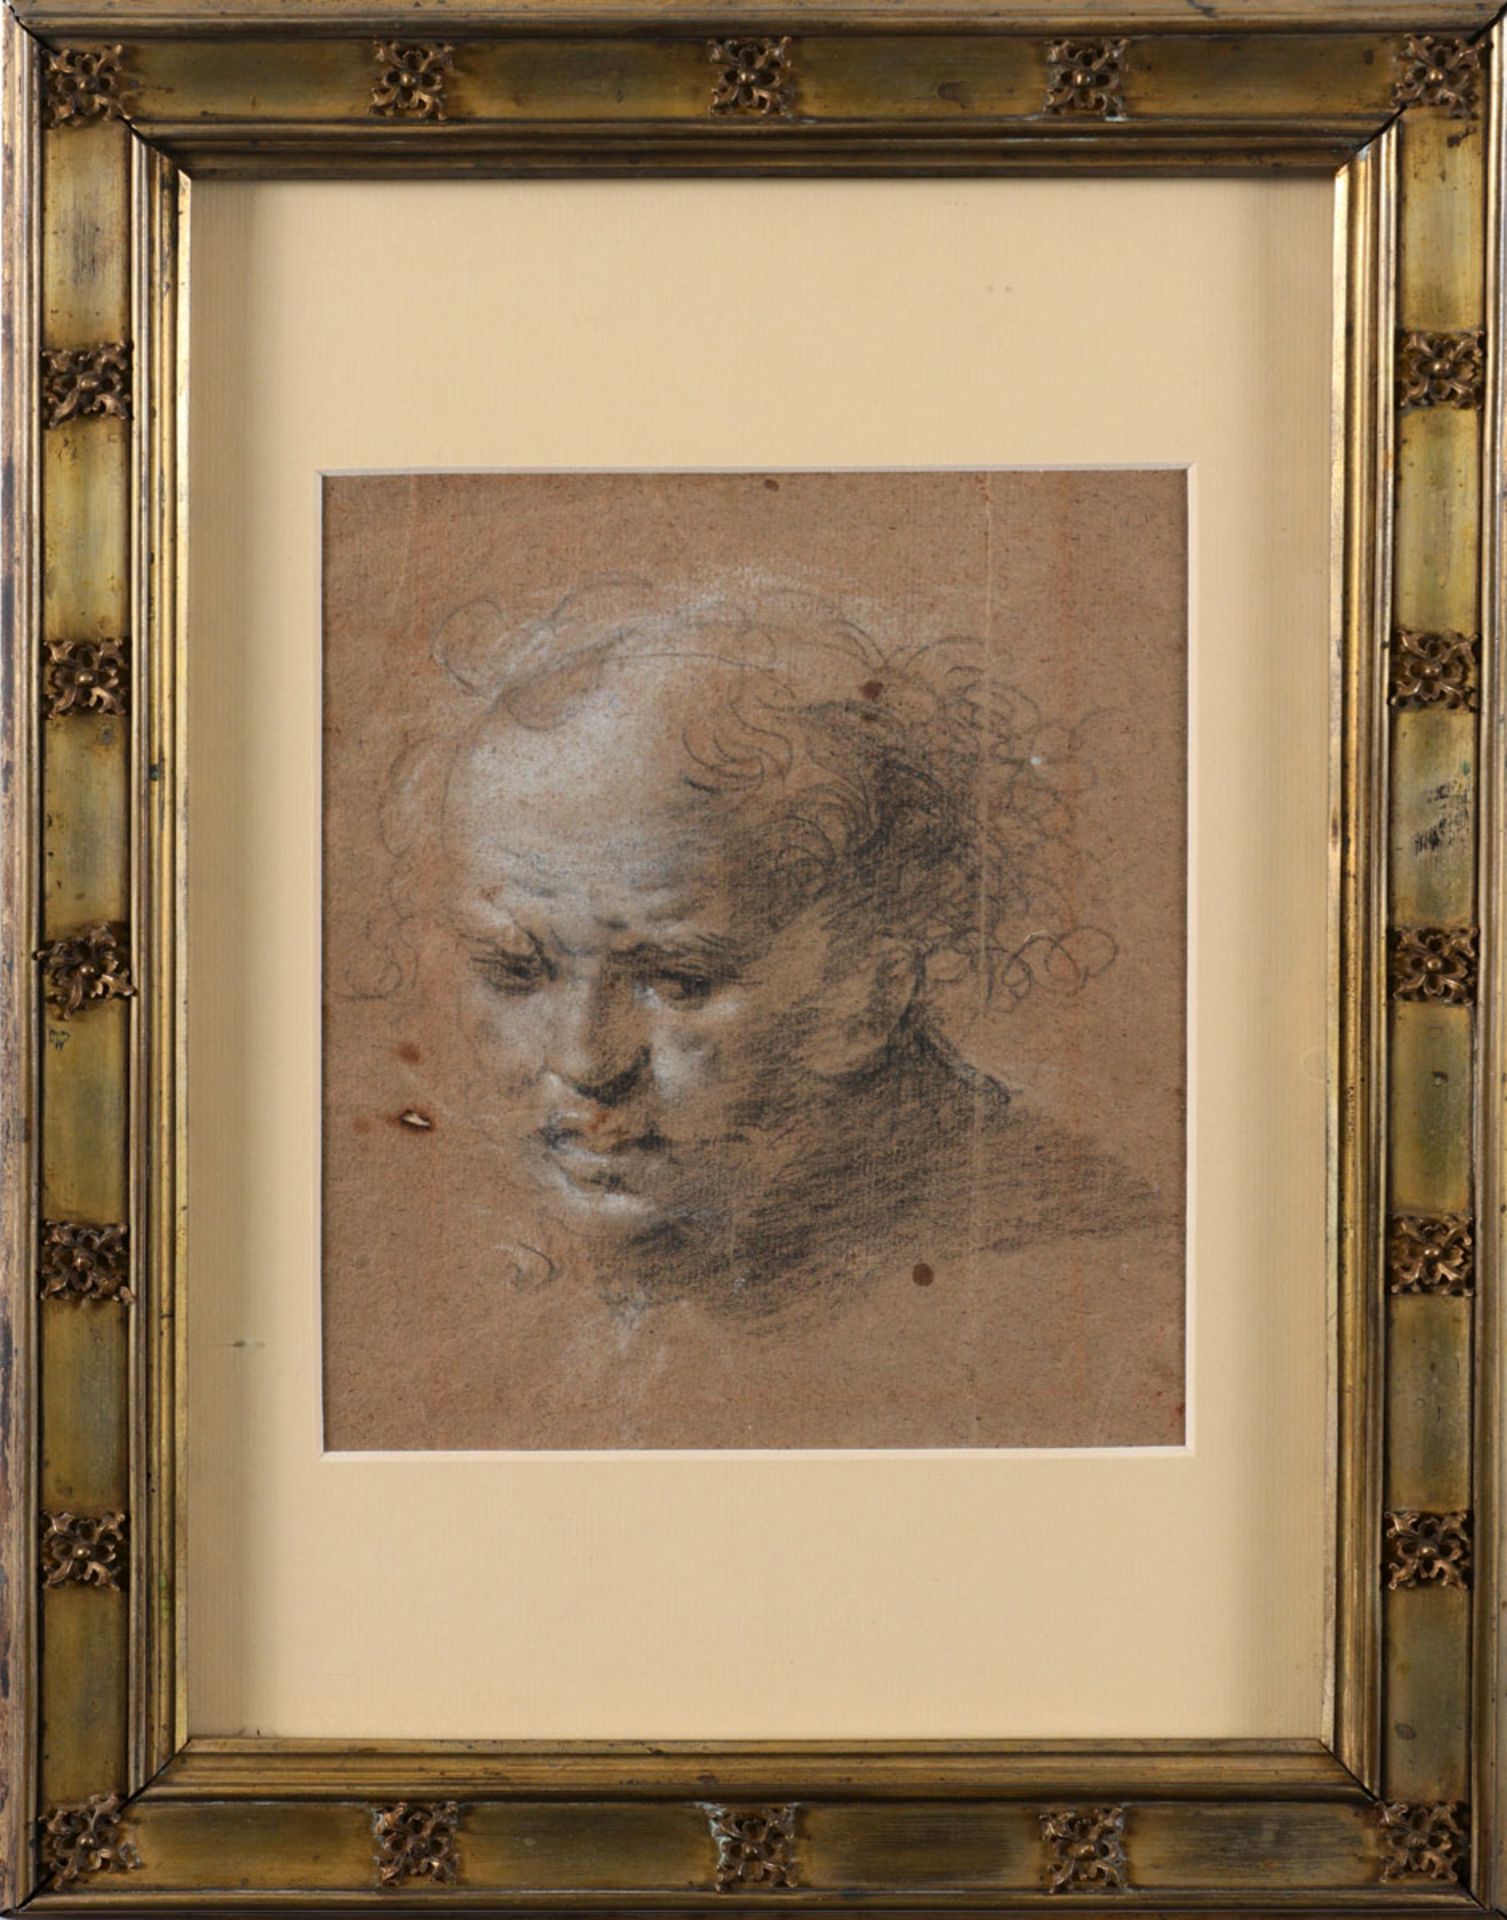 (attributable to) GIOVANNI BATTISTA TIEPOLO (1696-1770), MALE HEAD Charcoal and chalk on paper.